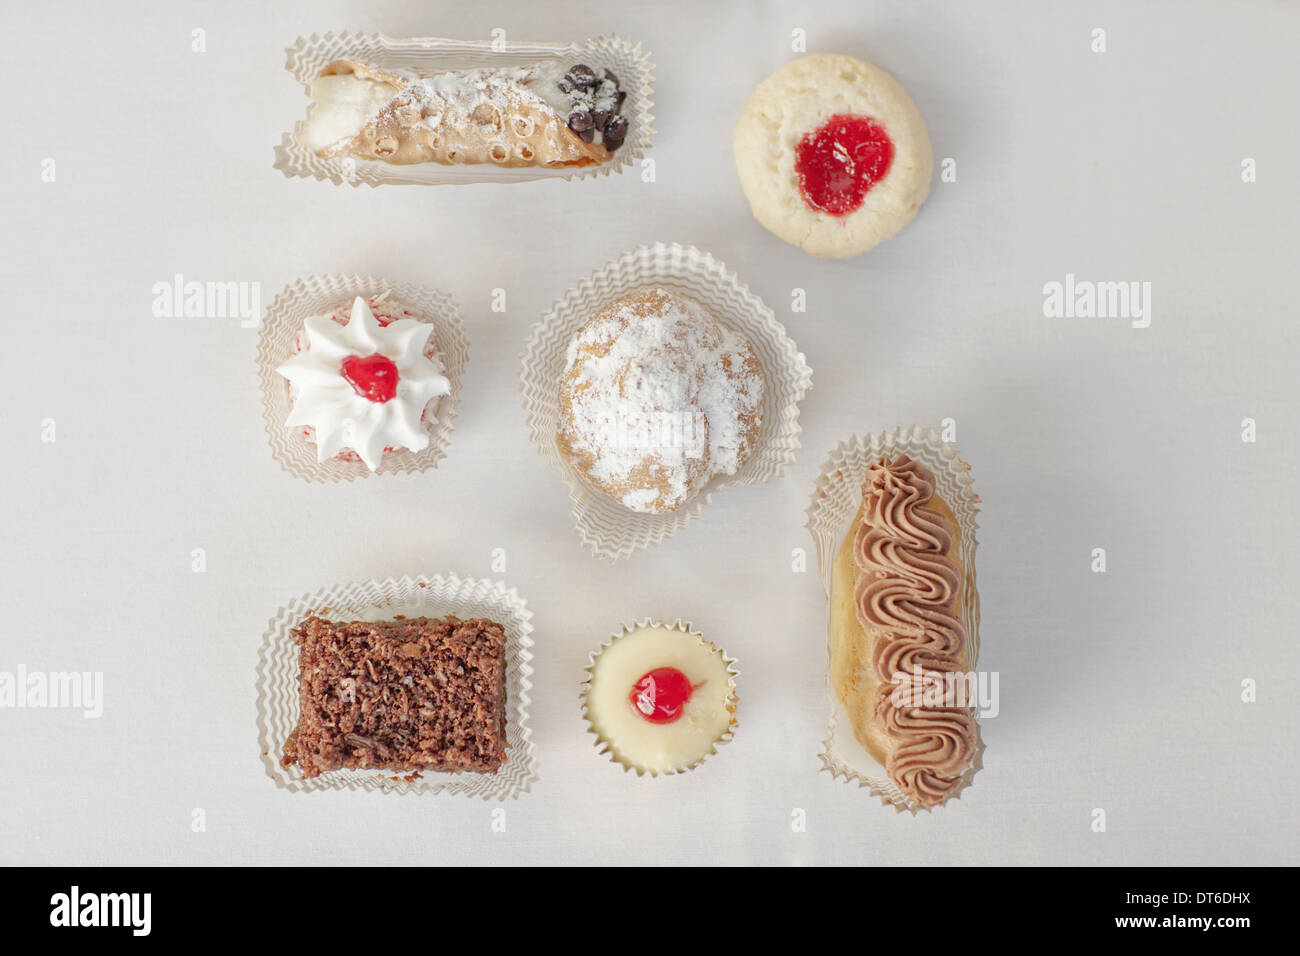 A selection of party desserts, organic food, and dainty cakes and pastries. Stock Photo